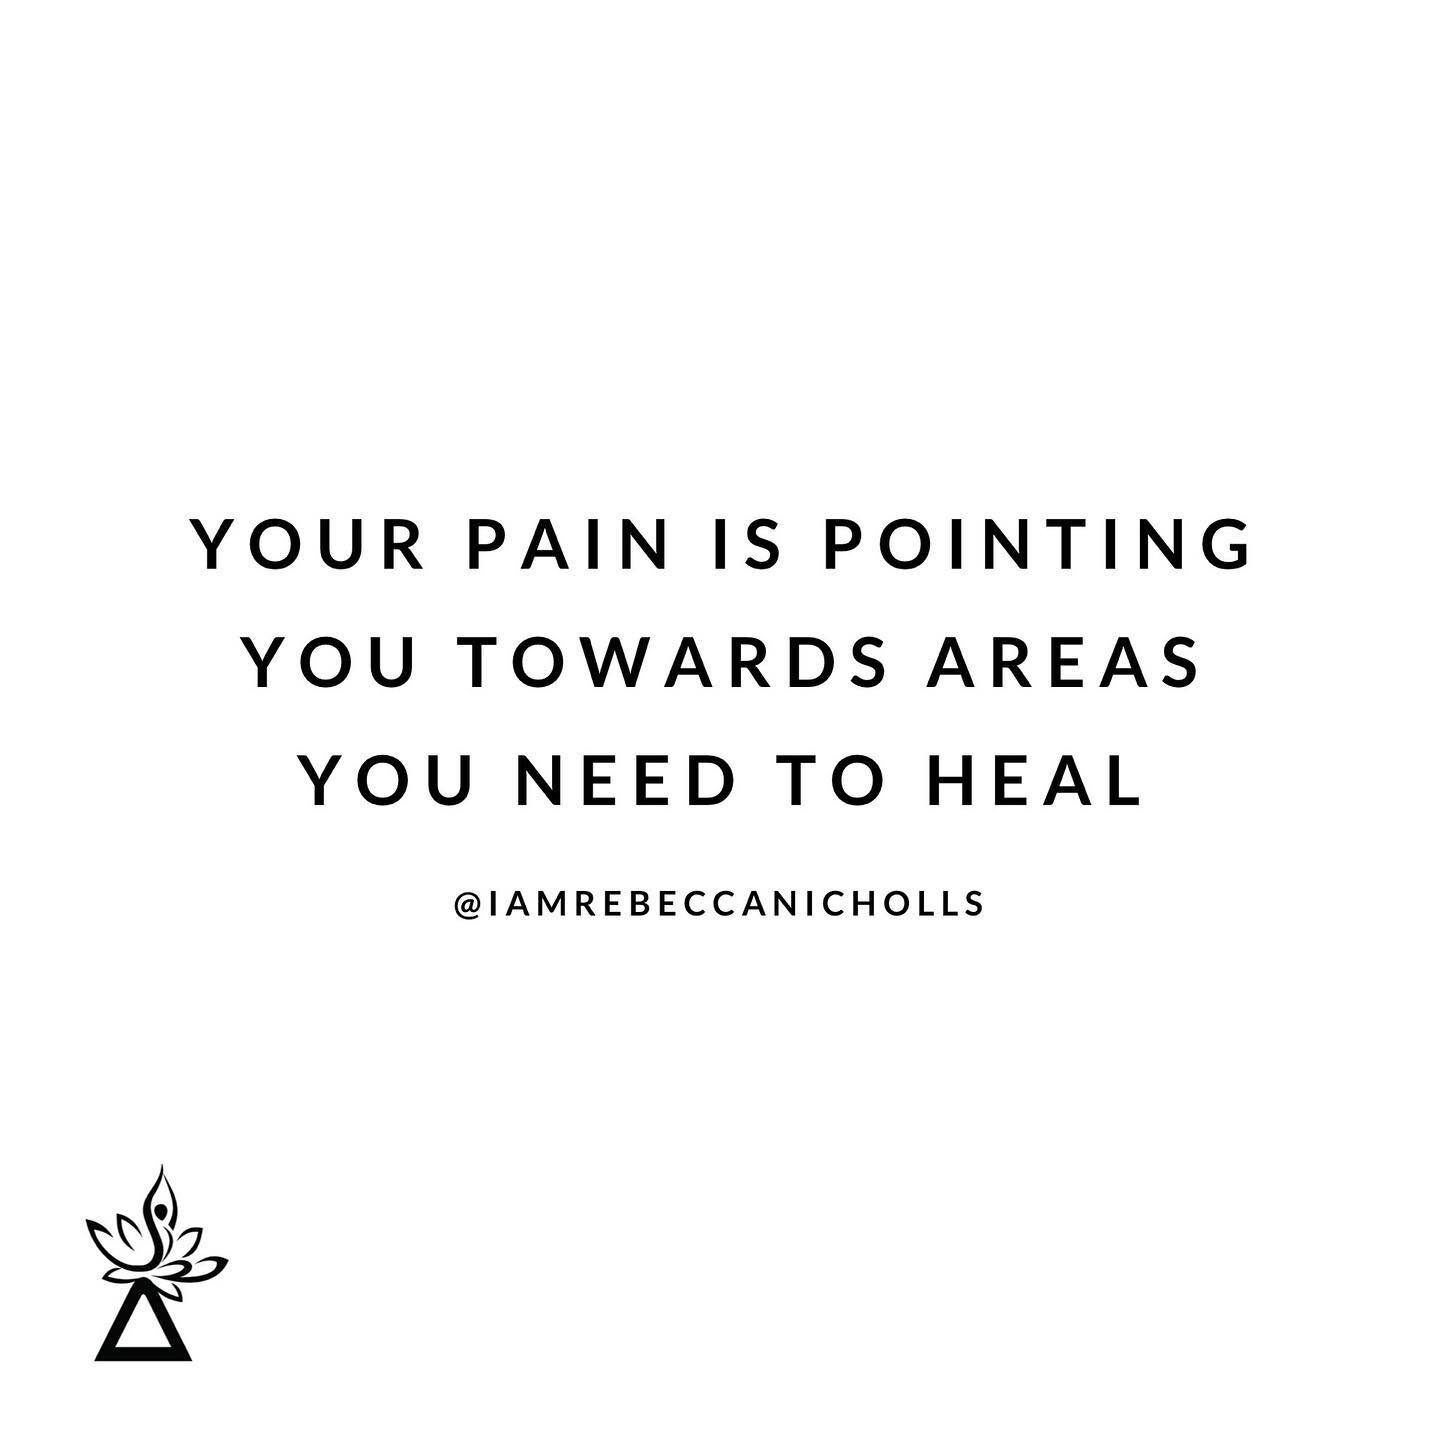 @nirvanaiswithin
⠀⠀⠀⠀⠀⠀⠀⠀⠀
Heart Chakra vibes today...
⠀⠀⠀⠀⠀⠀⠀⠀⠀
Where is there pain, in your life.
In your body
In your heart....
⠀⠀⠀⠀⠀⠀⠀⠀⠀
Are you willing to sit with it
Ask it some questions 
⠀⠀⠀⠀⠀⠀⠀⠀⠀
Don&rsquo;t ignore it
Don&rsquo;t run to the 